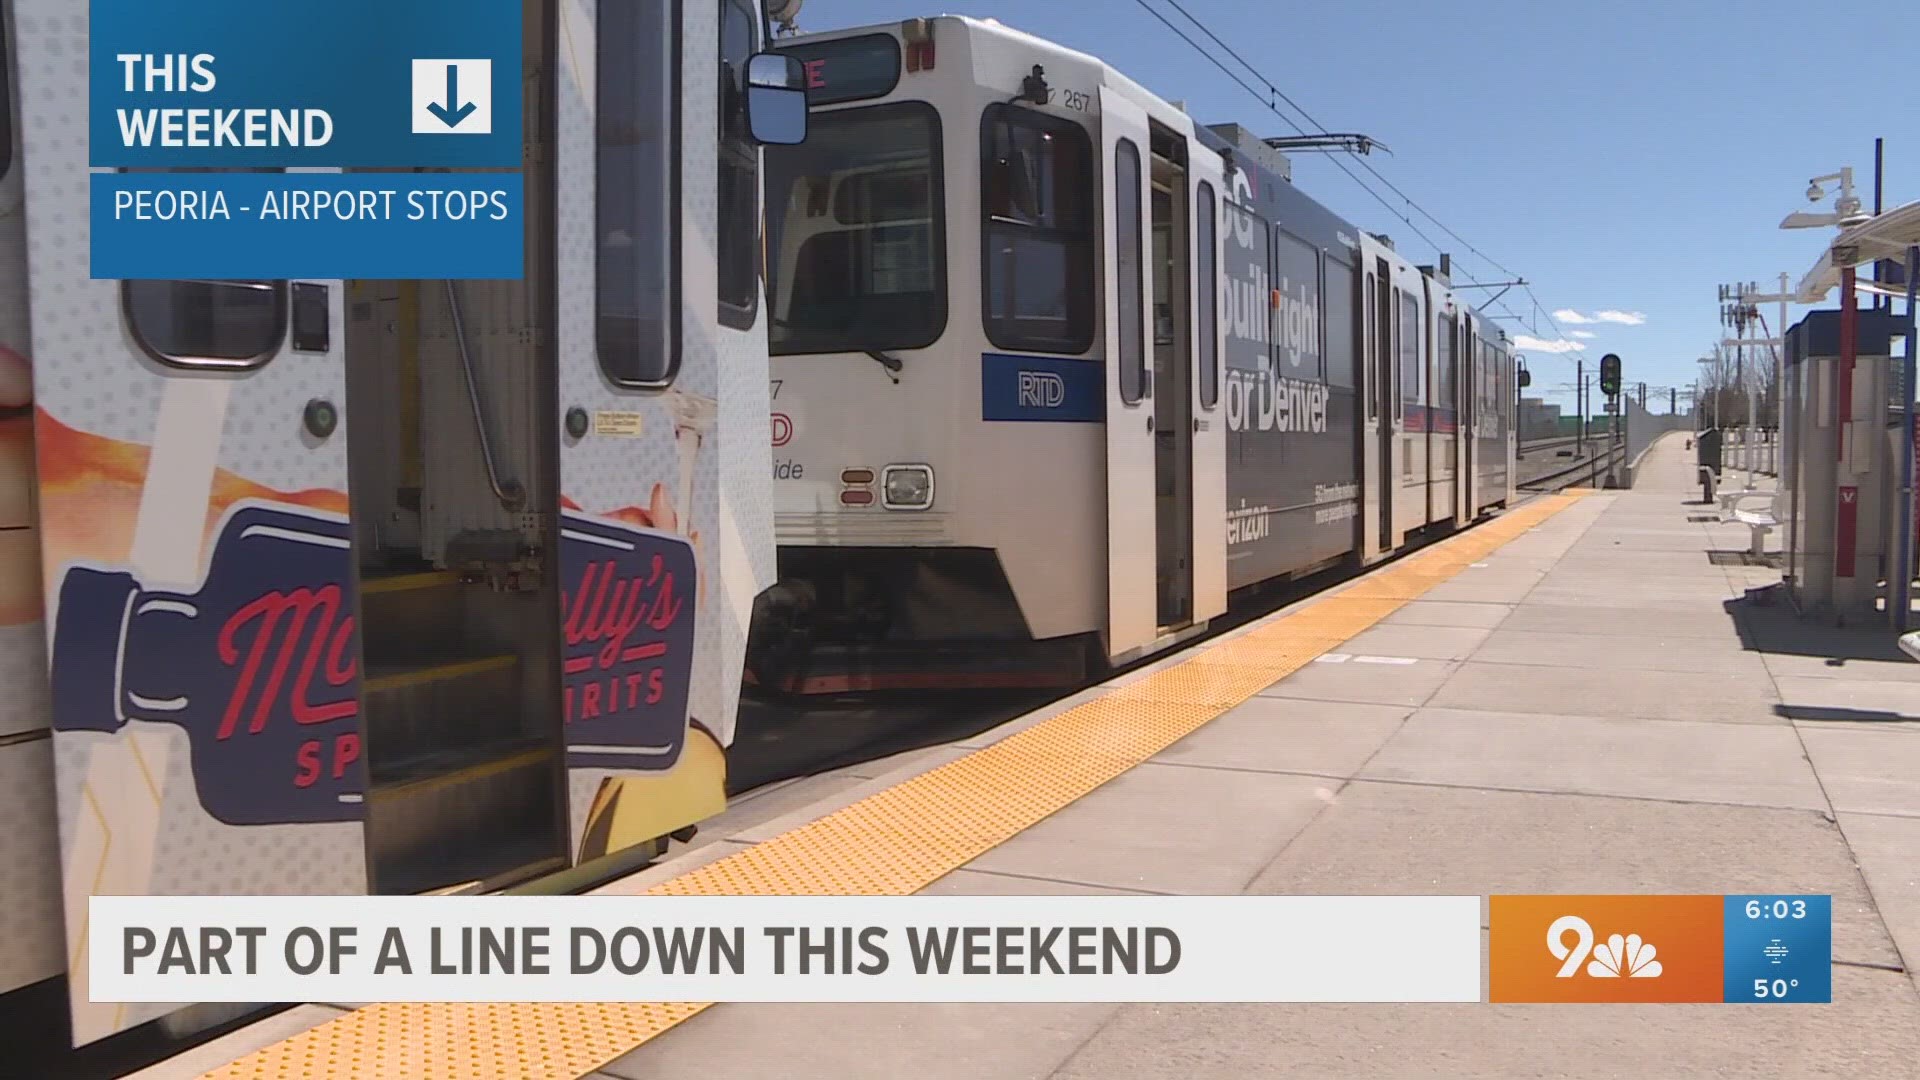 Travelers to DIA can expect disruptions on the RTD A Line this weekend